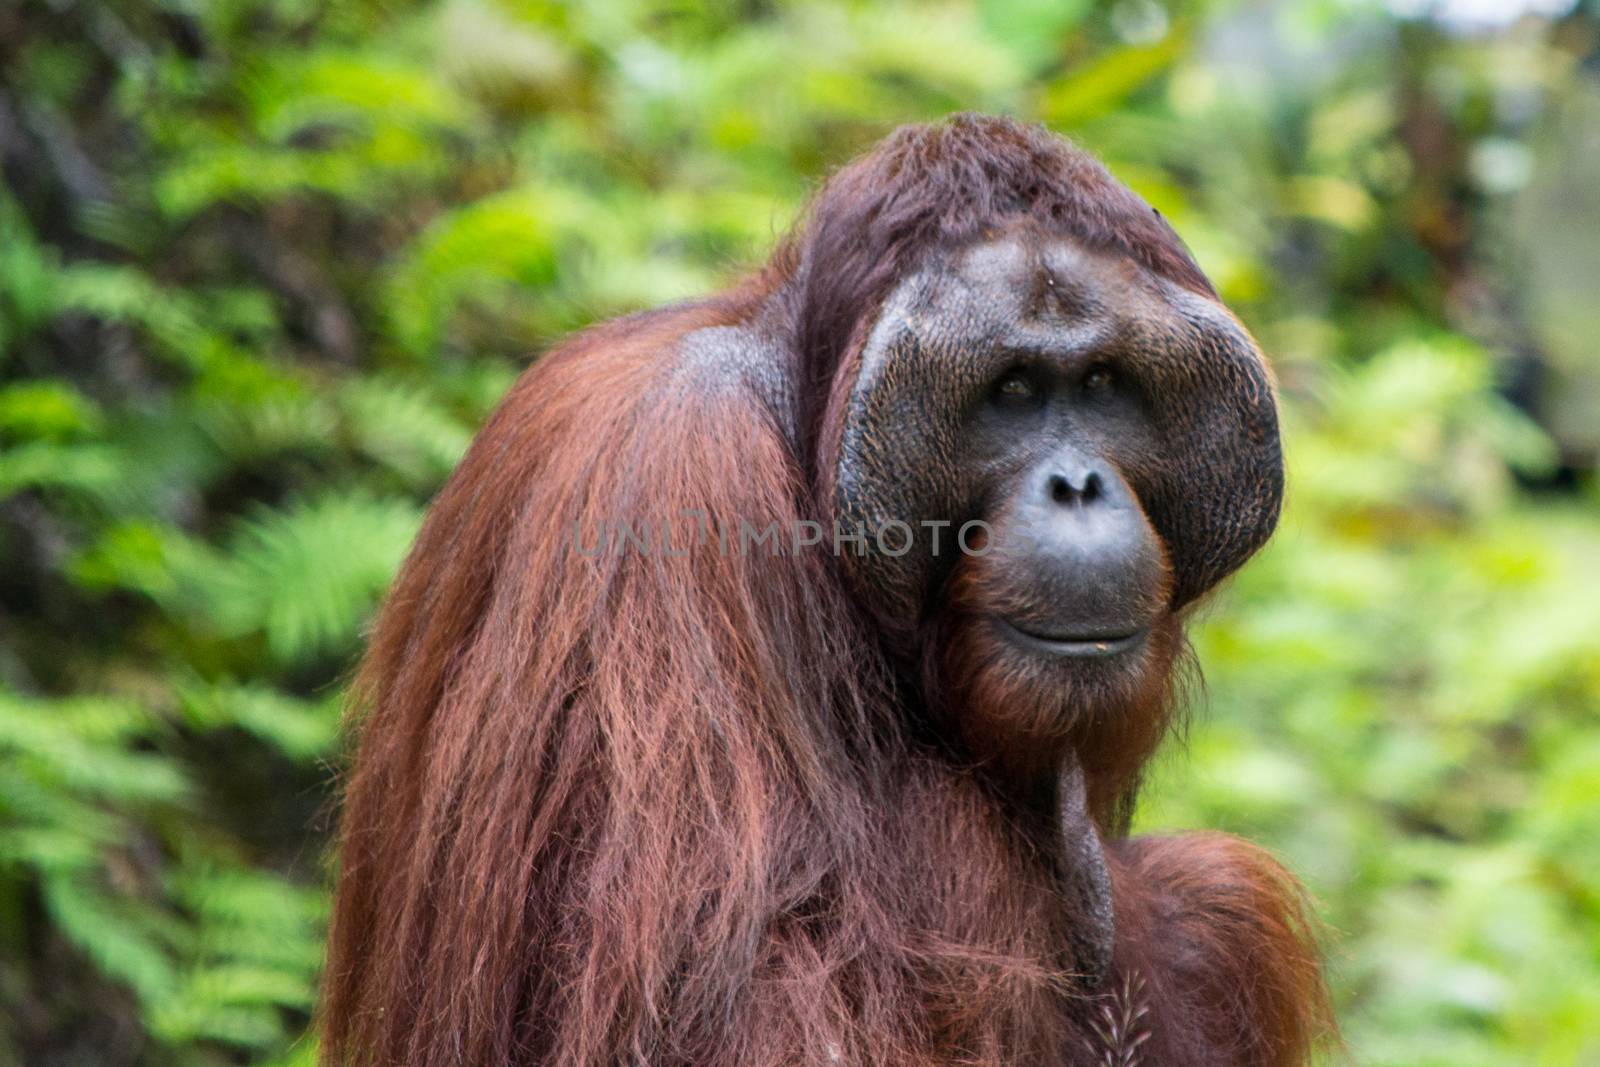 Orangutan, adult male, close-up of face and hair in the nature of Borneo, Malaysia (Sarawak Kuching region) by kb79